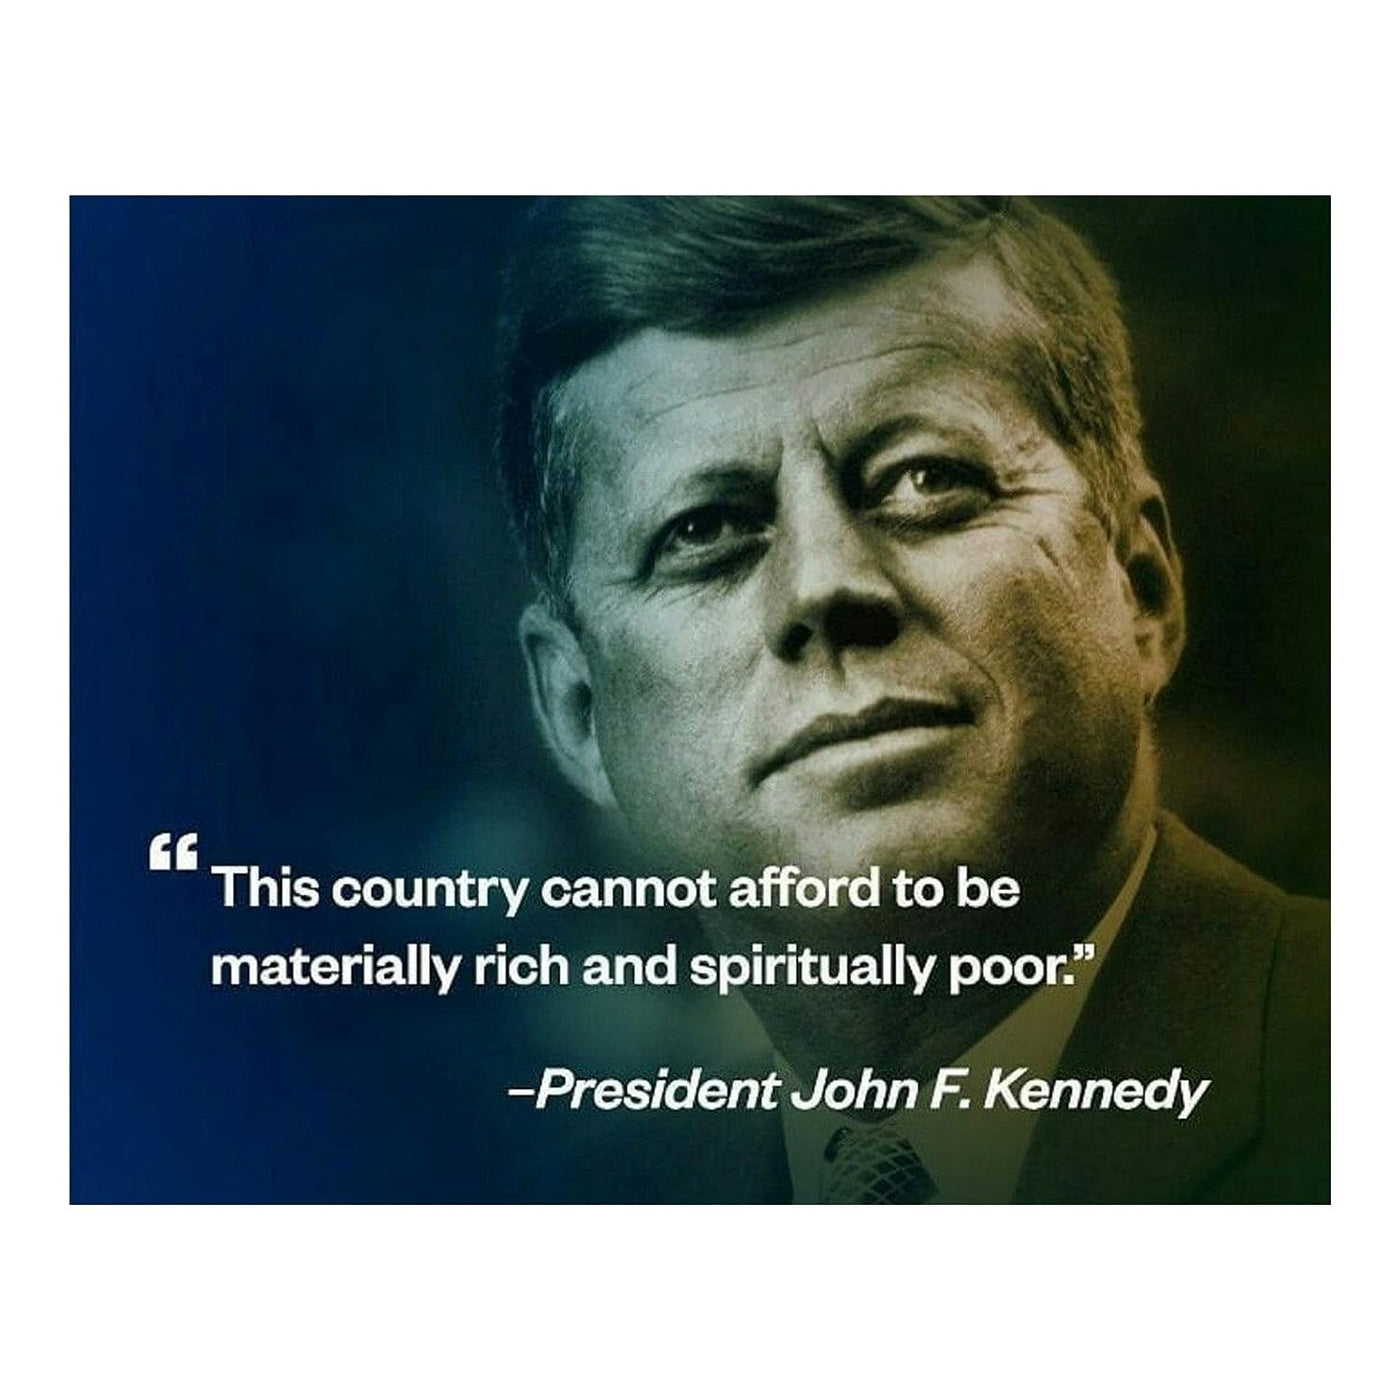 John F. Kennedy Quotes Wall Art-"Country Cannot Afford To Be Spiritually Poor"- 10 x 8" Political Poster Print-Ready to Frame. JFK Presidential Portrait. Patriotic Home-Office-School-Library Decor!